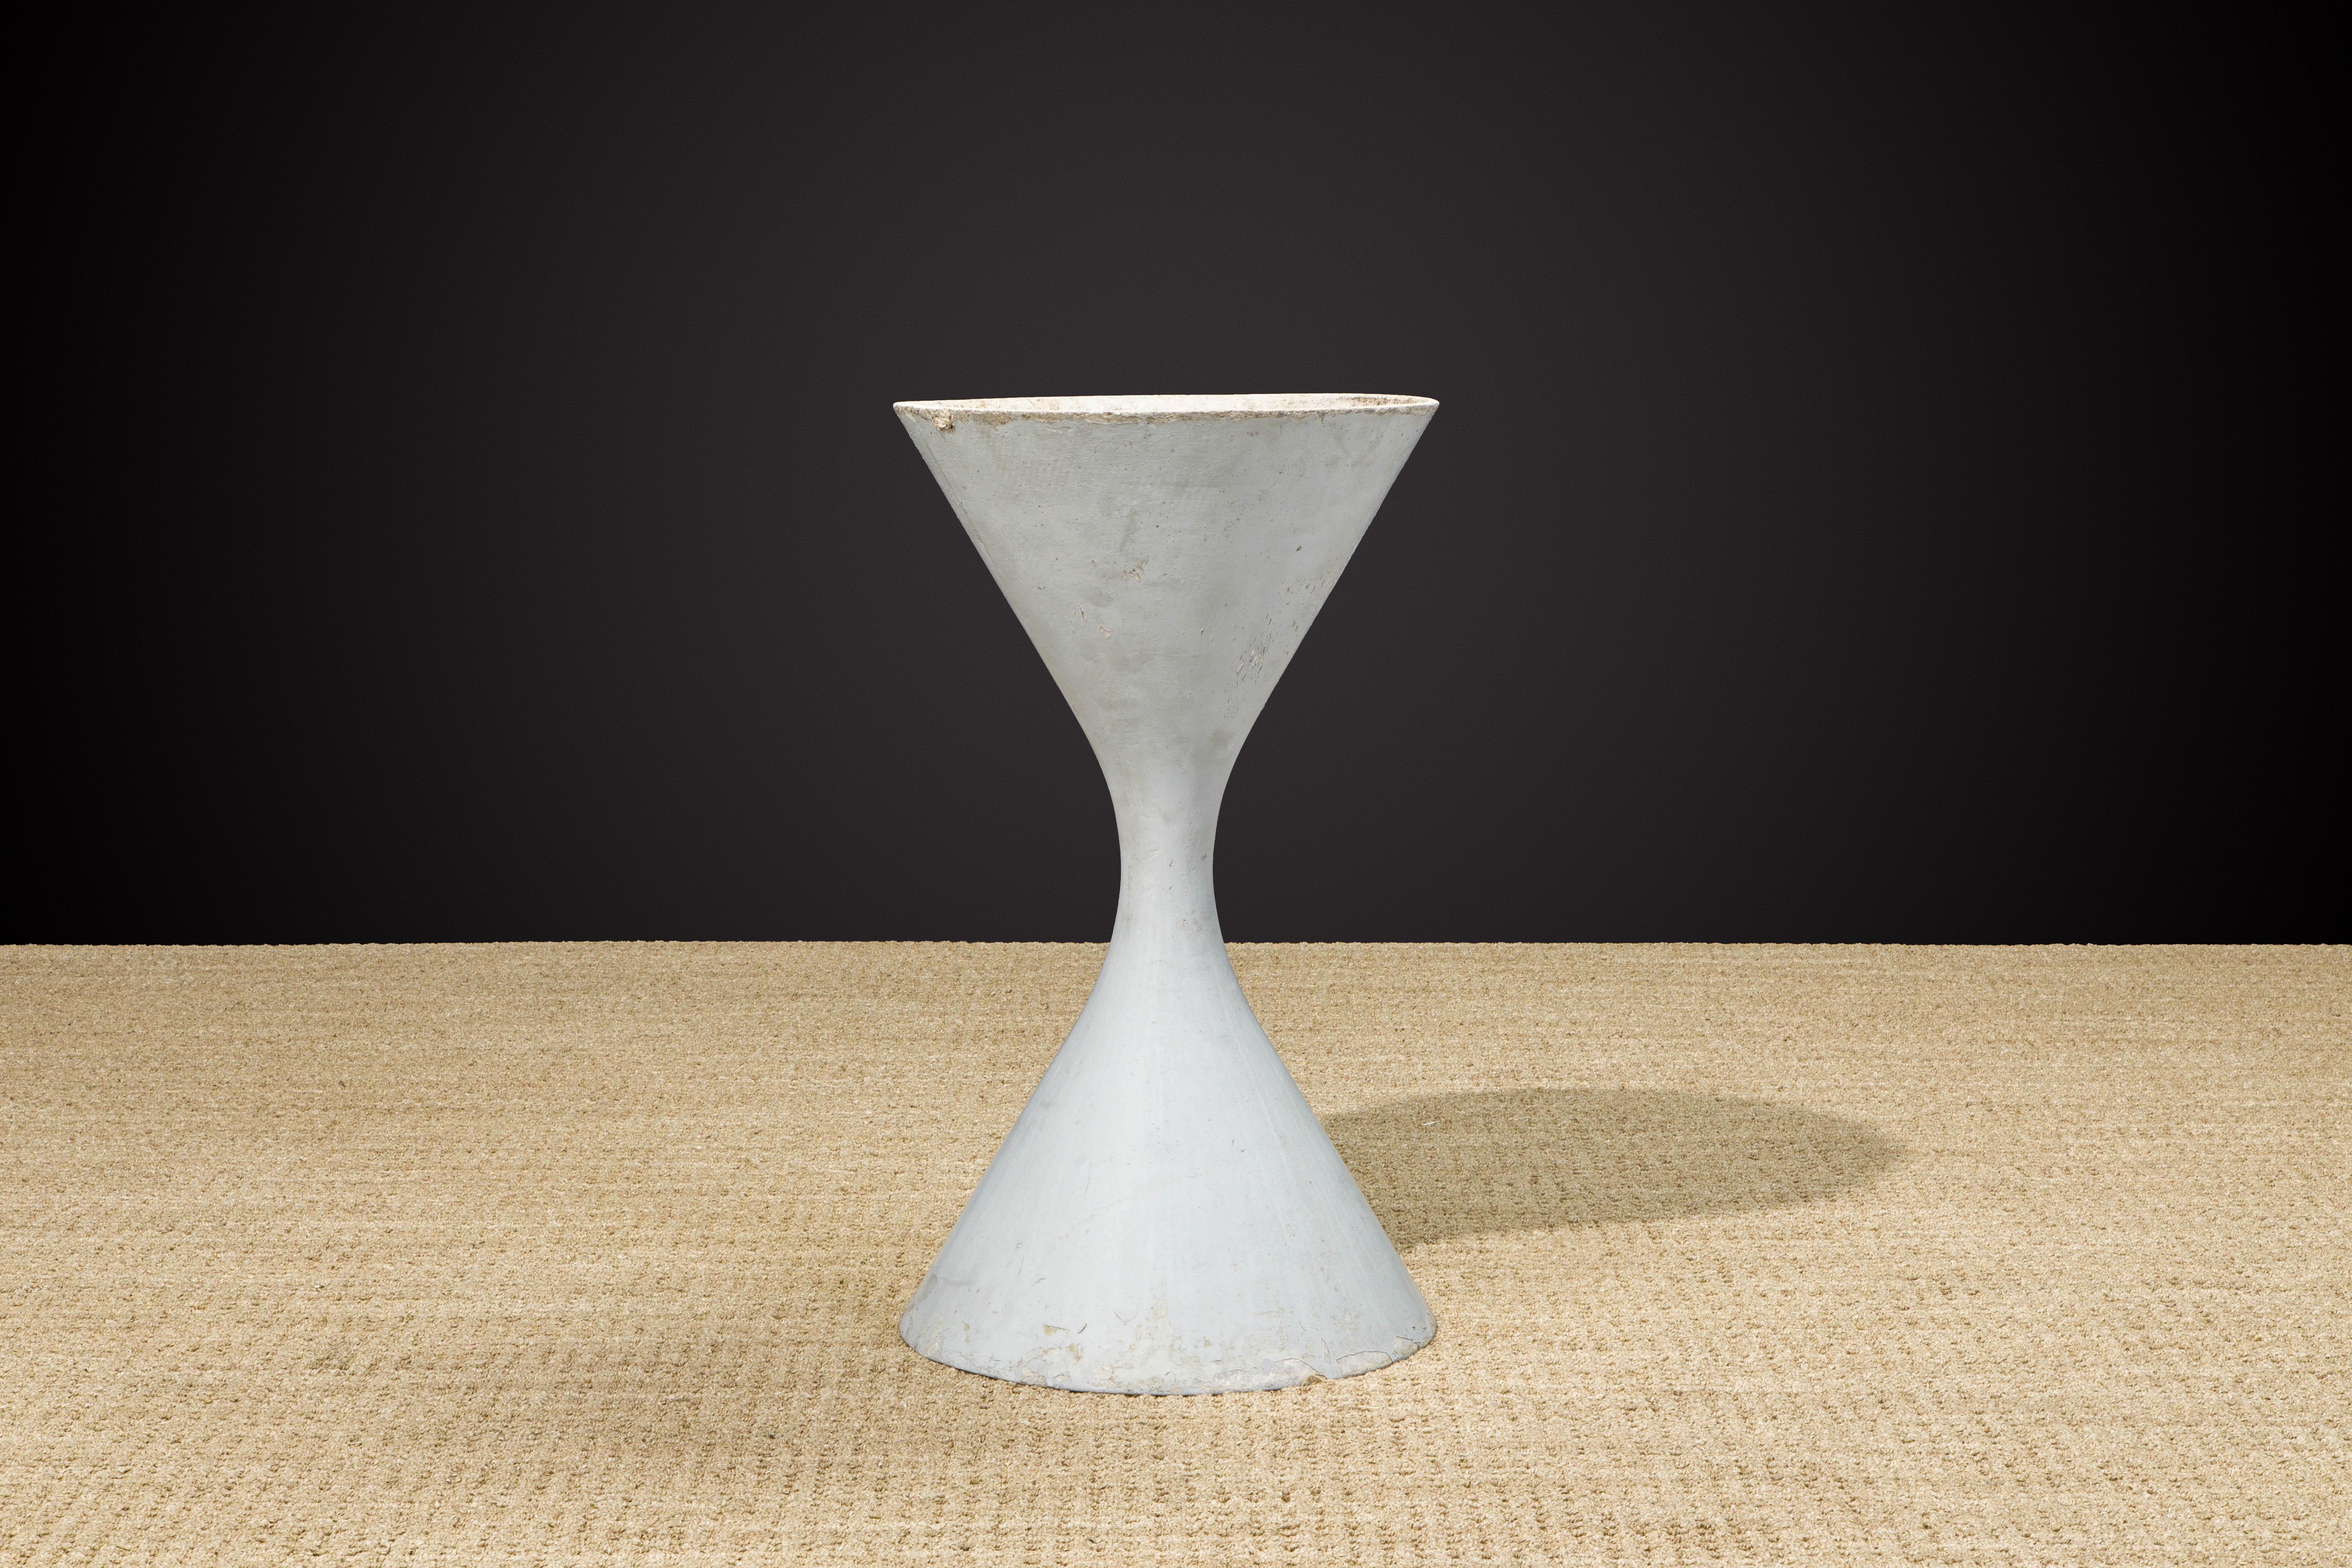 Modern Willy Guhl for Eternit 'Diablo' Concrete Hourglass Planters, c 1968 For Sale